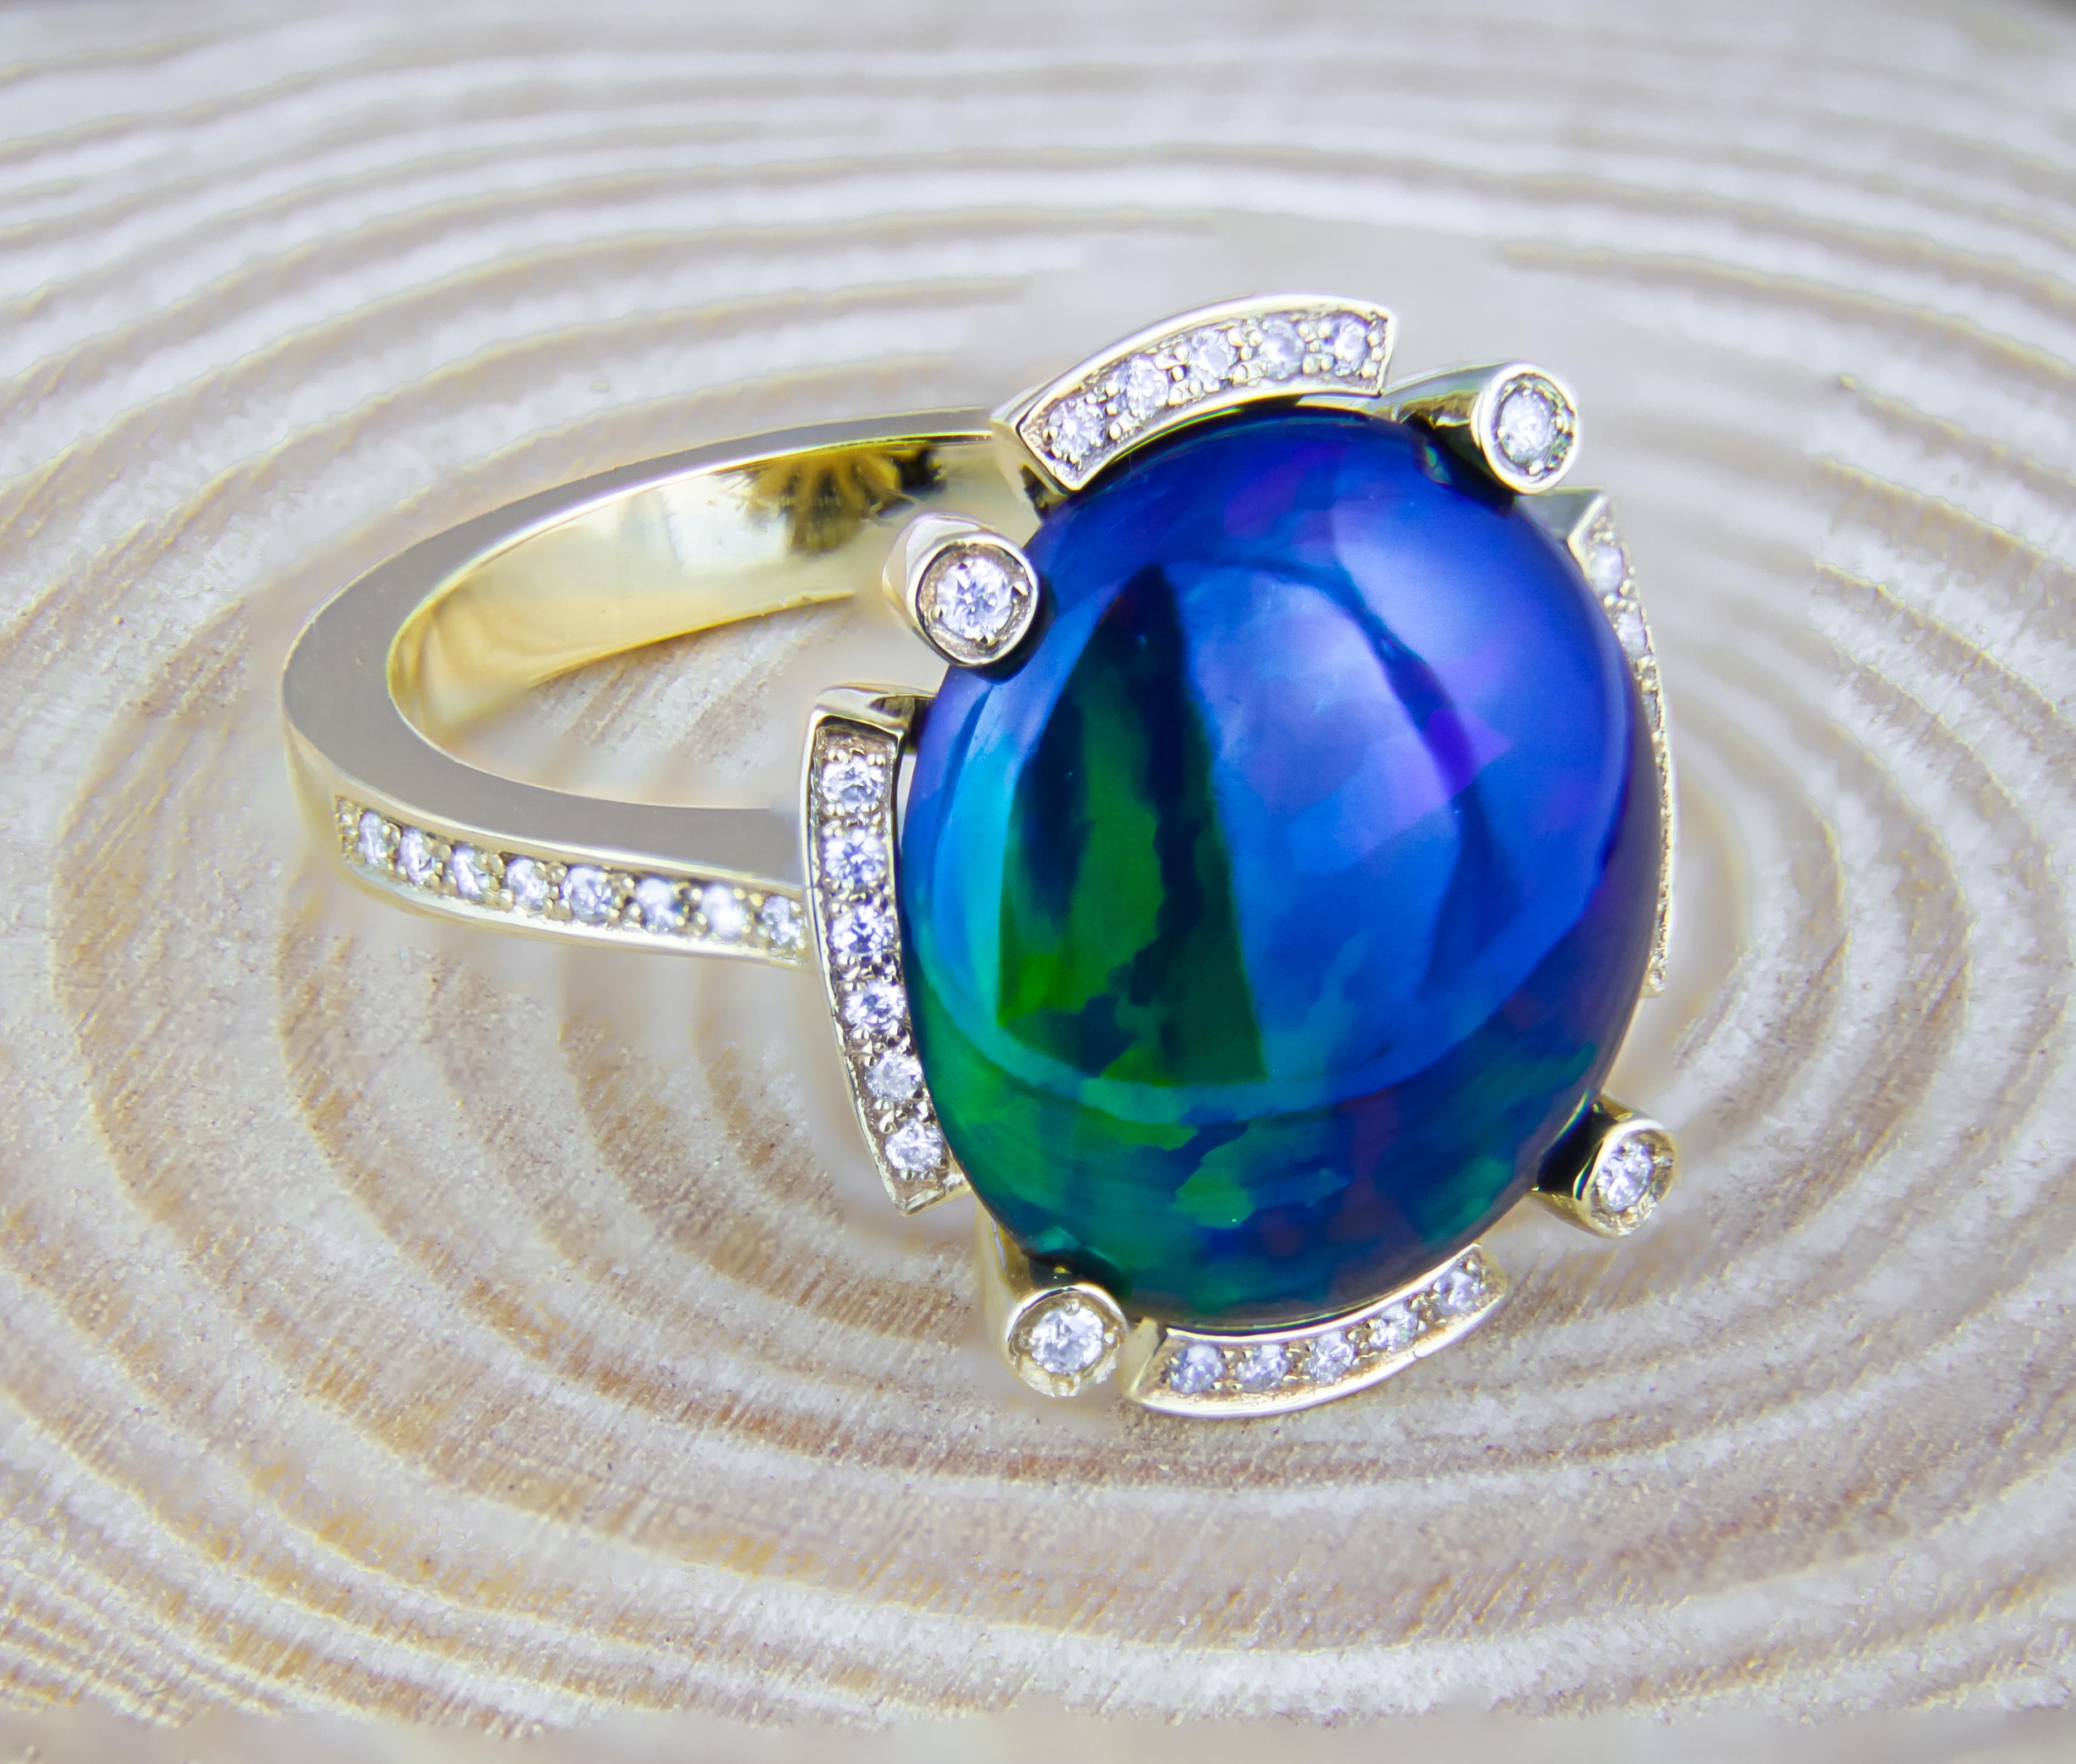 For Sale:  Black Opal and Diamonds Ring in 14k Gold. Gold Ring with Opal ! 11